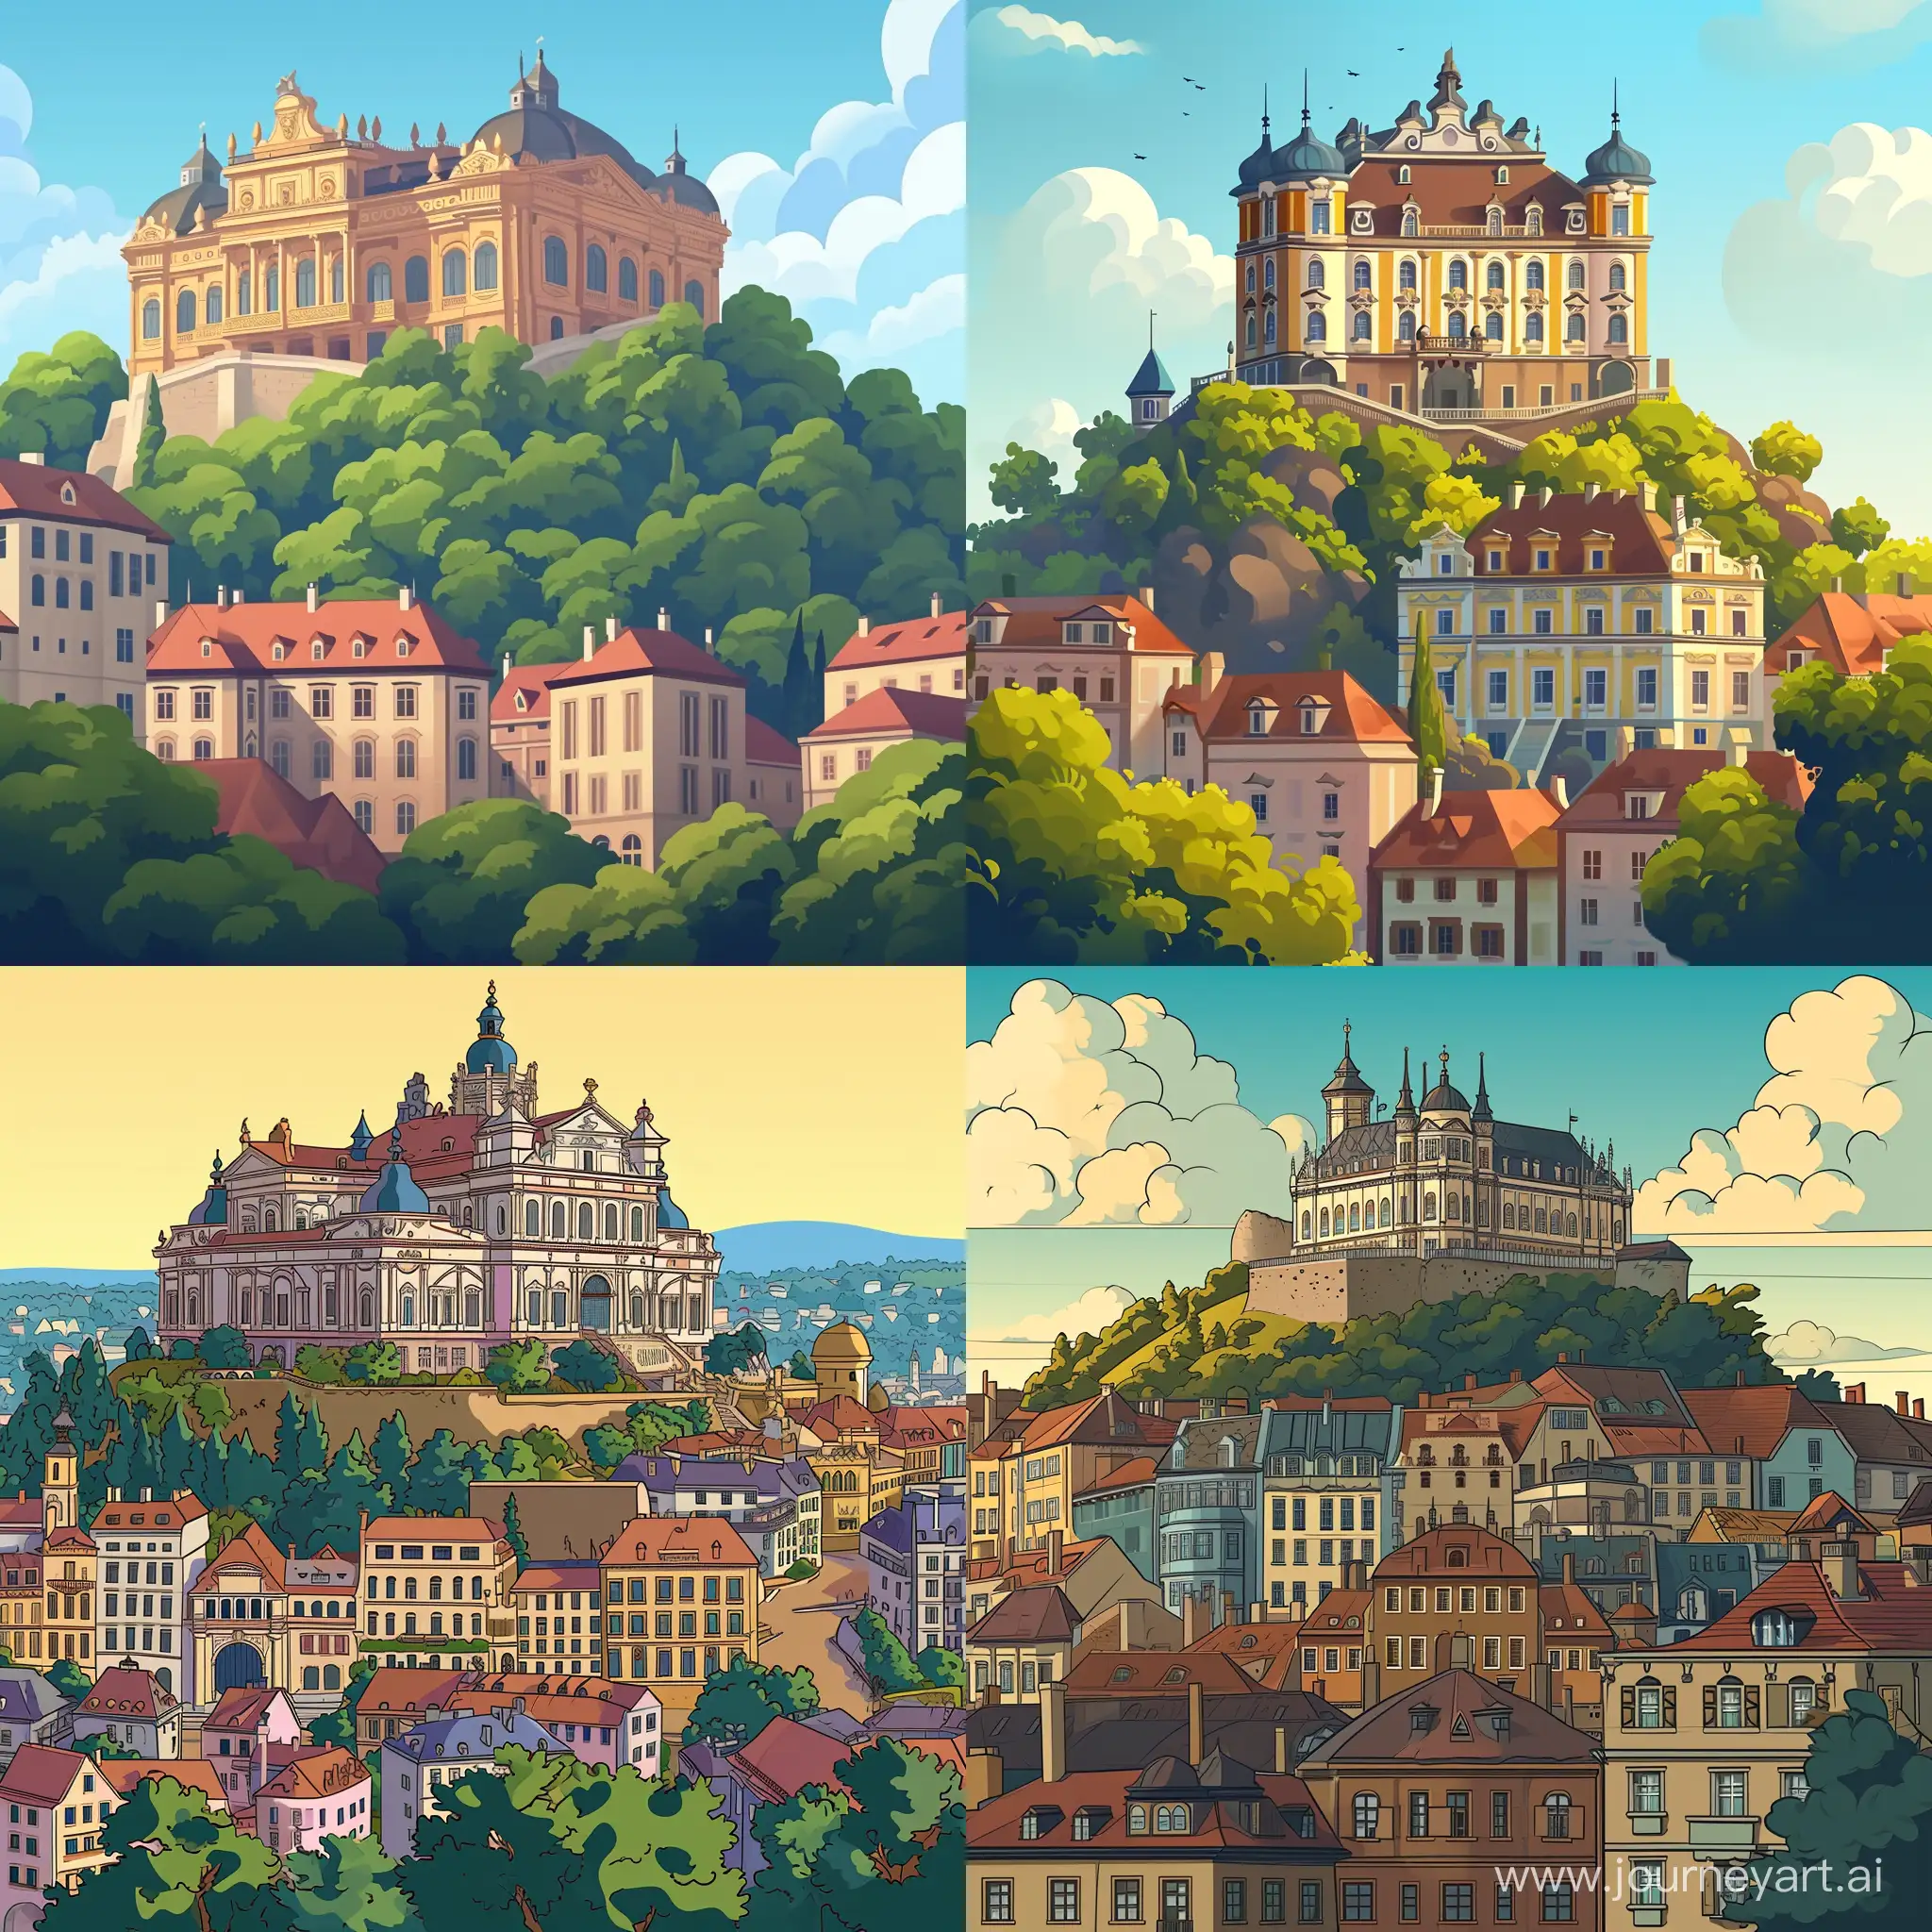 a baroque palace building, top of hill in the middle of medieval big city, in cartoon style